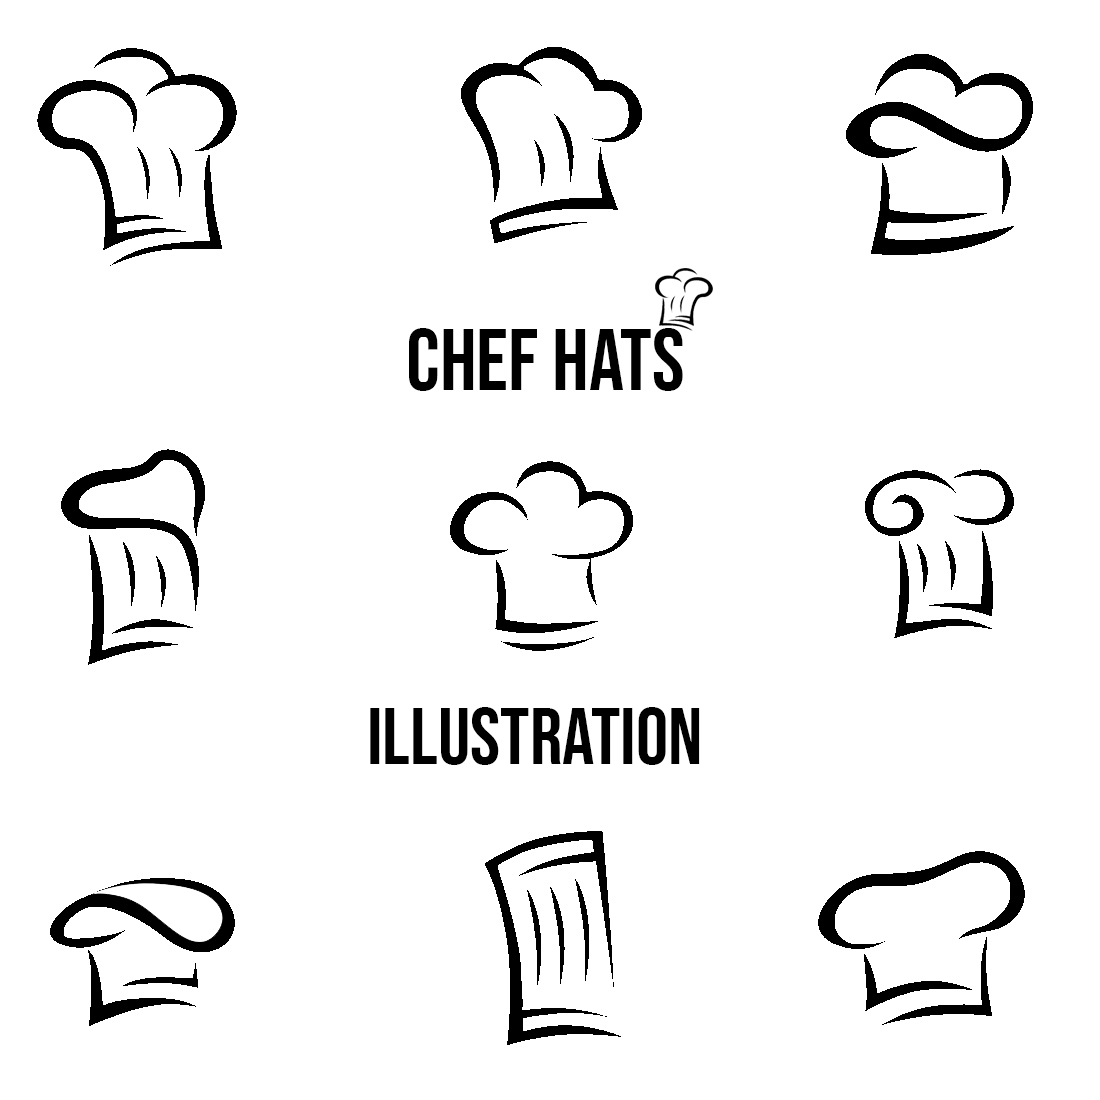 CHEF HATS ILLUSTRATION cover image.